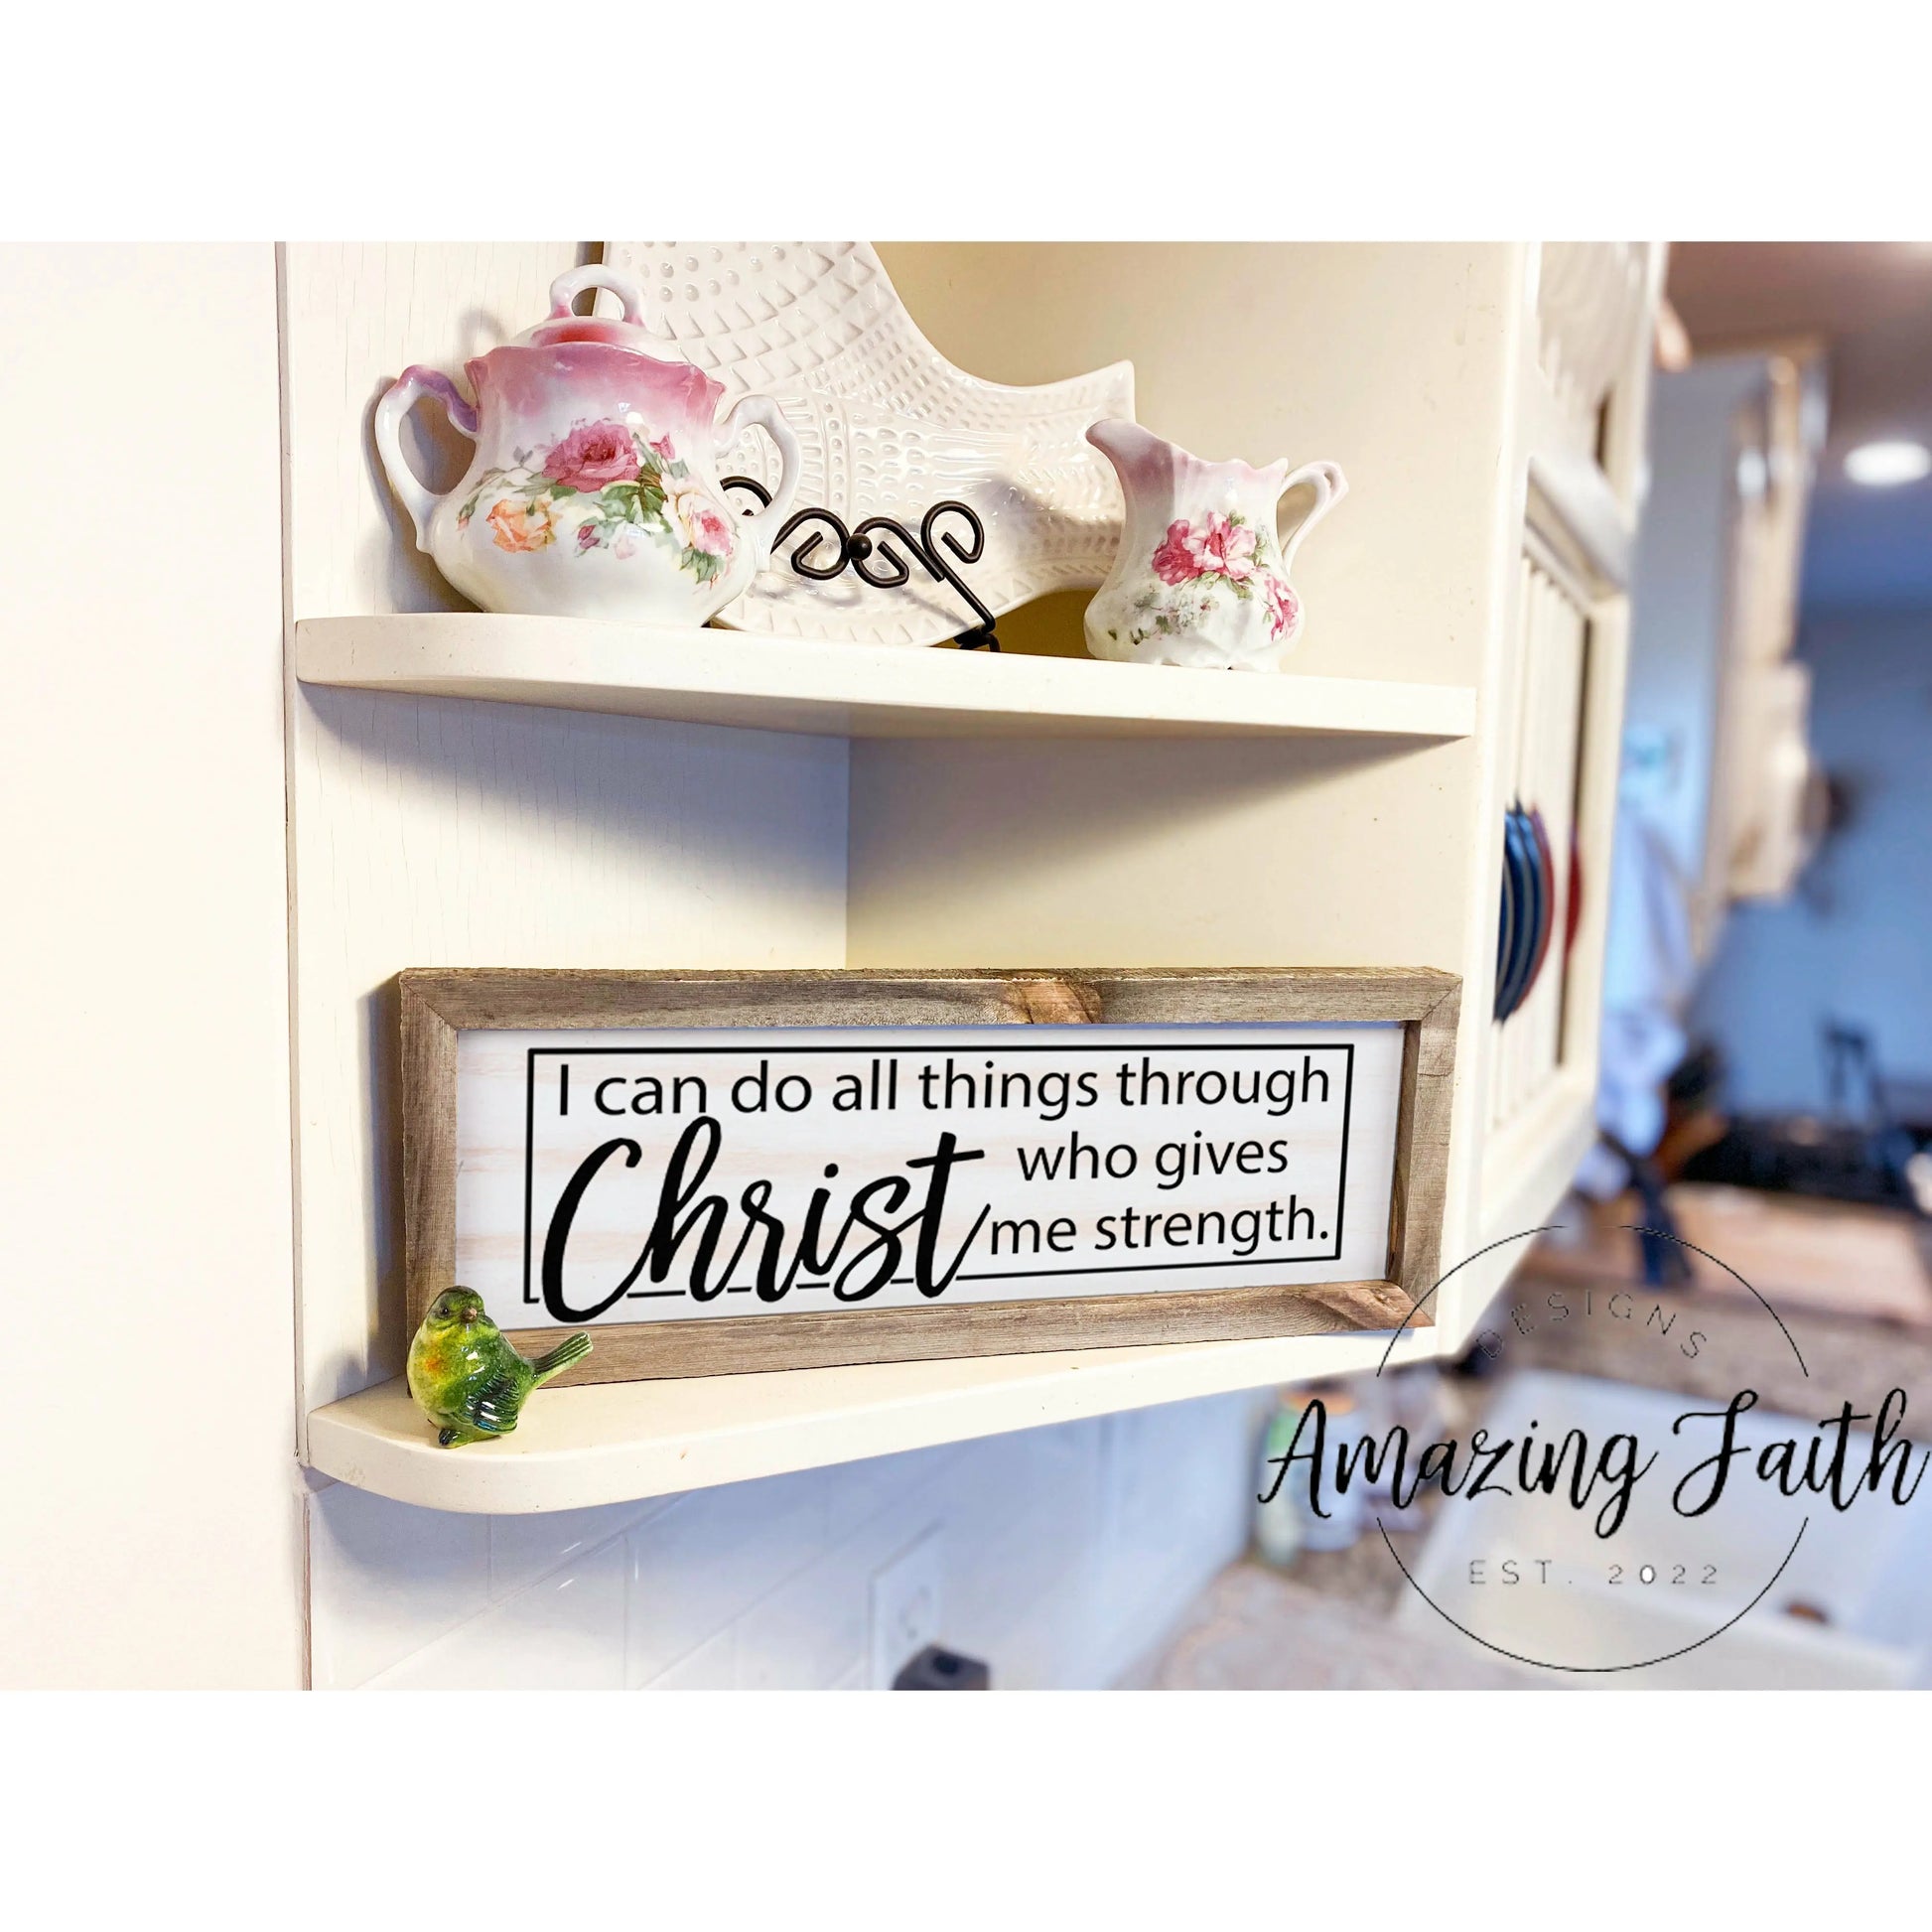 I Can Do All Things Through Christ Who Gives Me Strength Rustic Whitewash Wood Frame Scripture Sign | 5.5" x 15" Farmhouse Decor amazingfaithdesigns